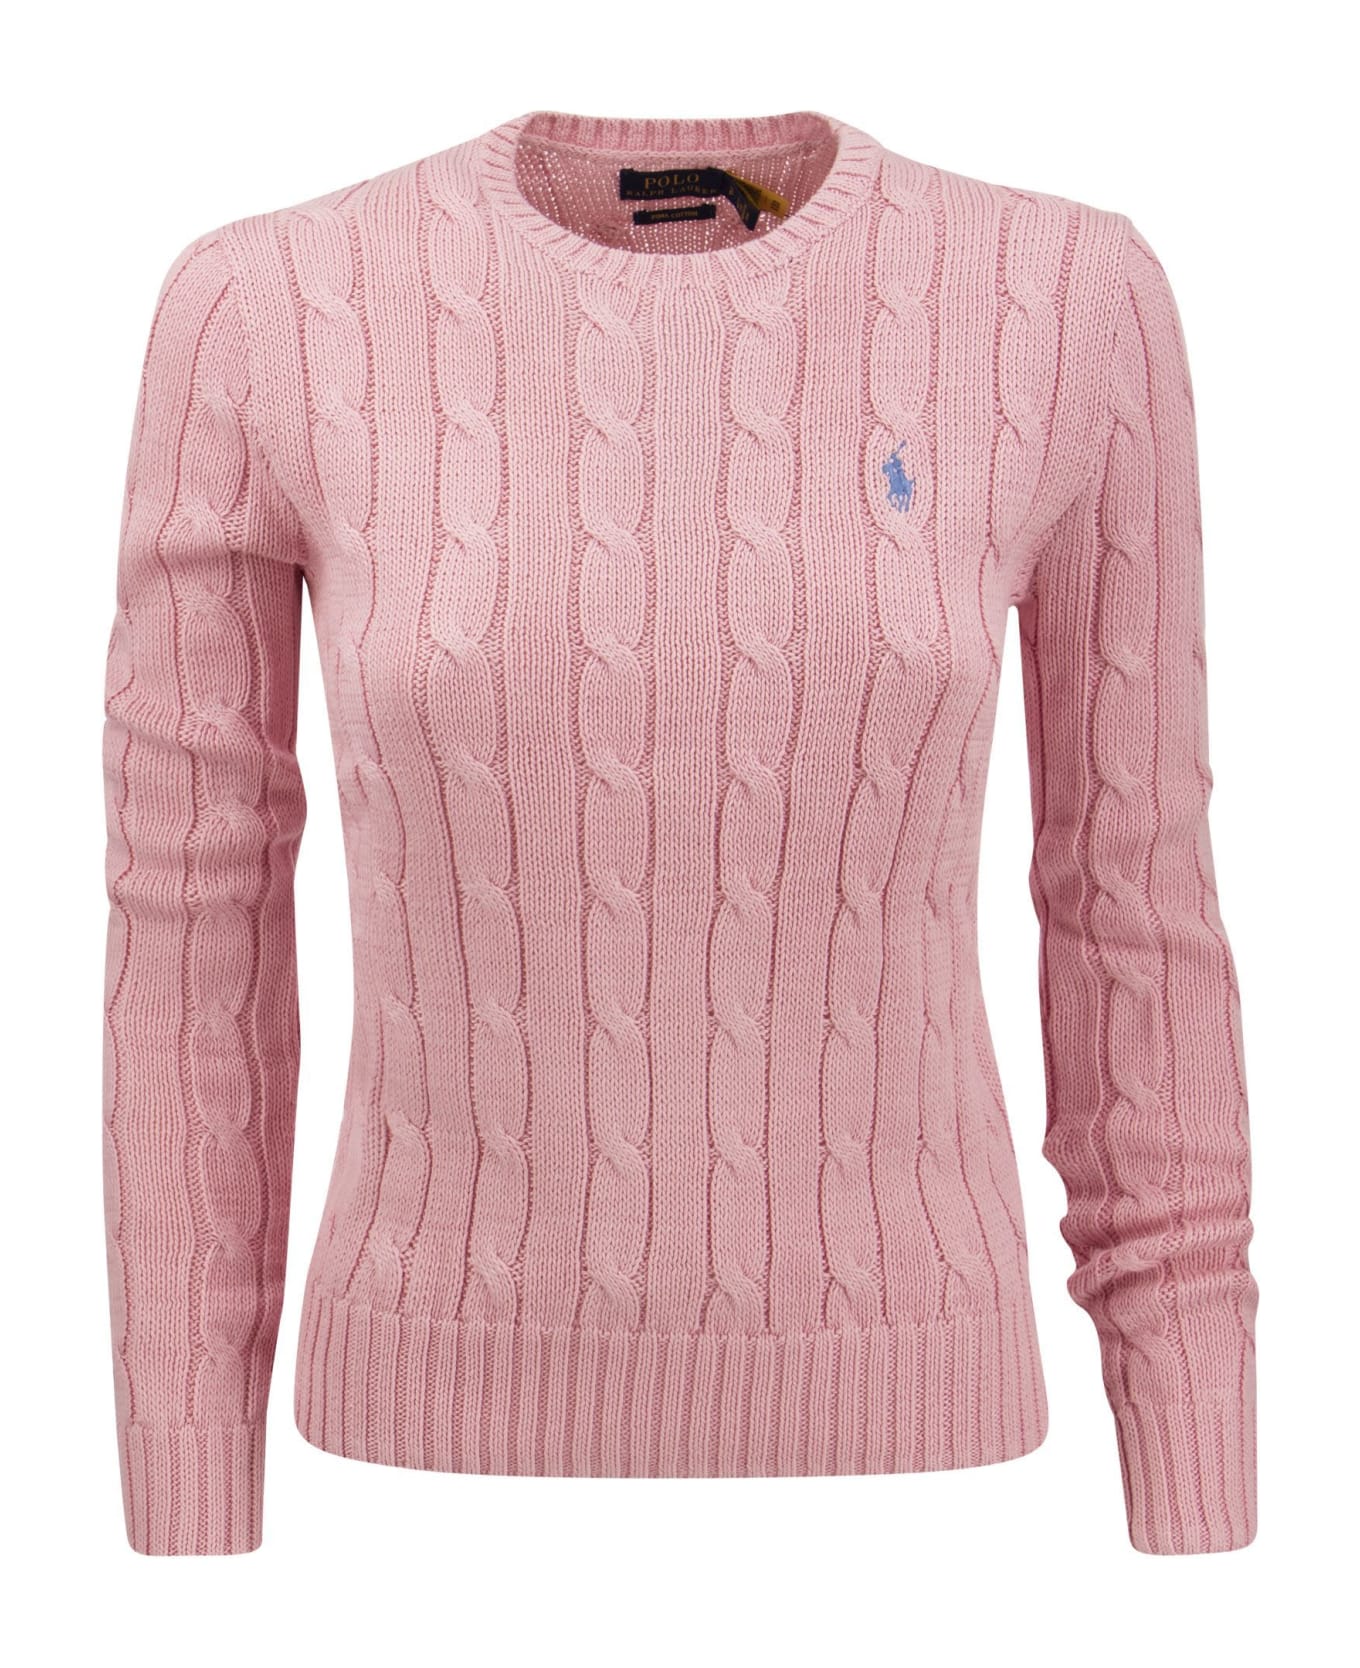 Polo Ralph Lauren Sweater With Pony - Pink